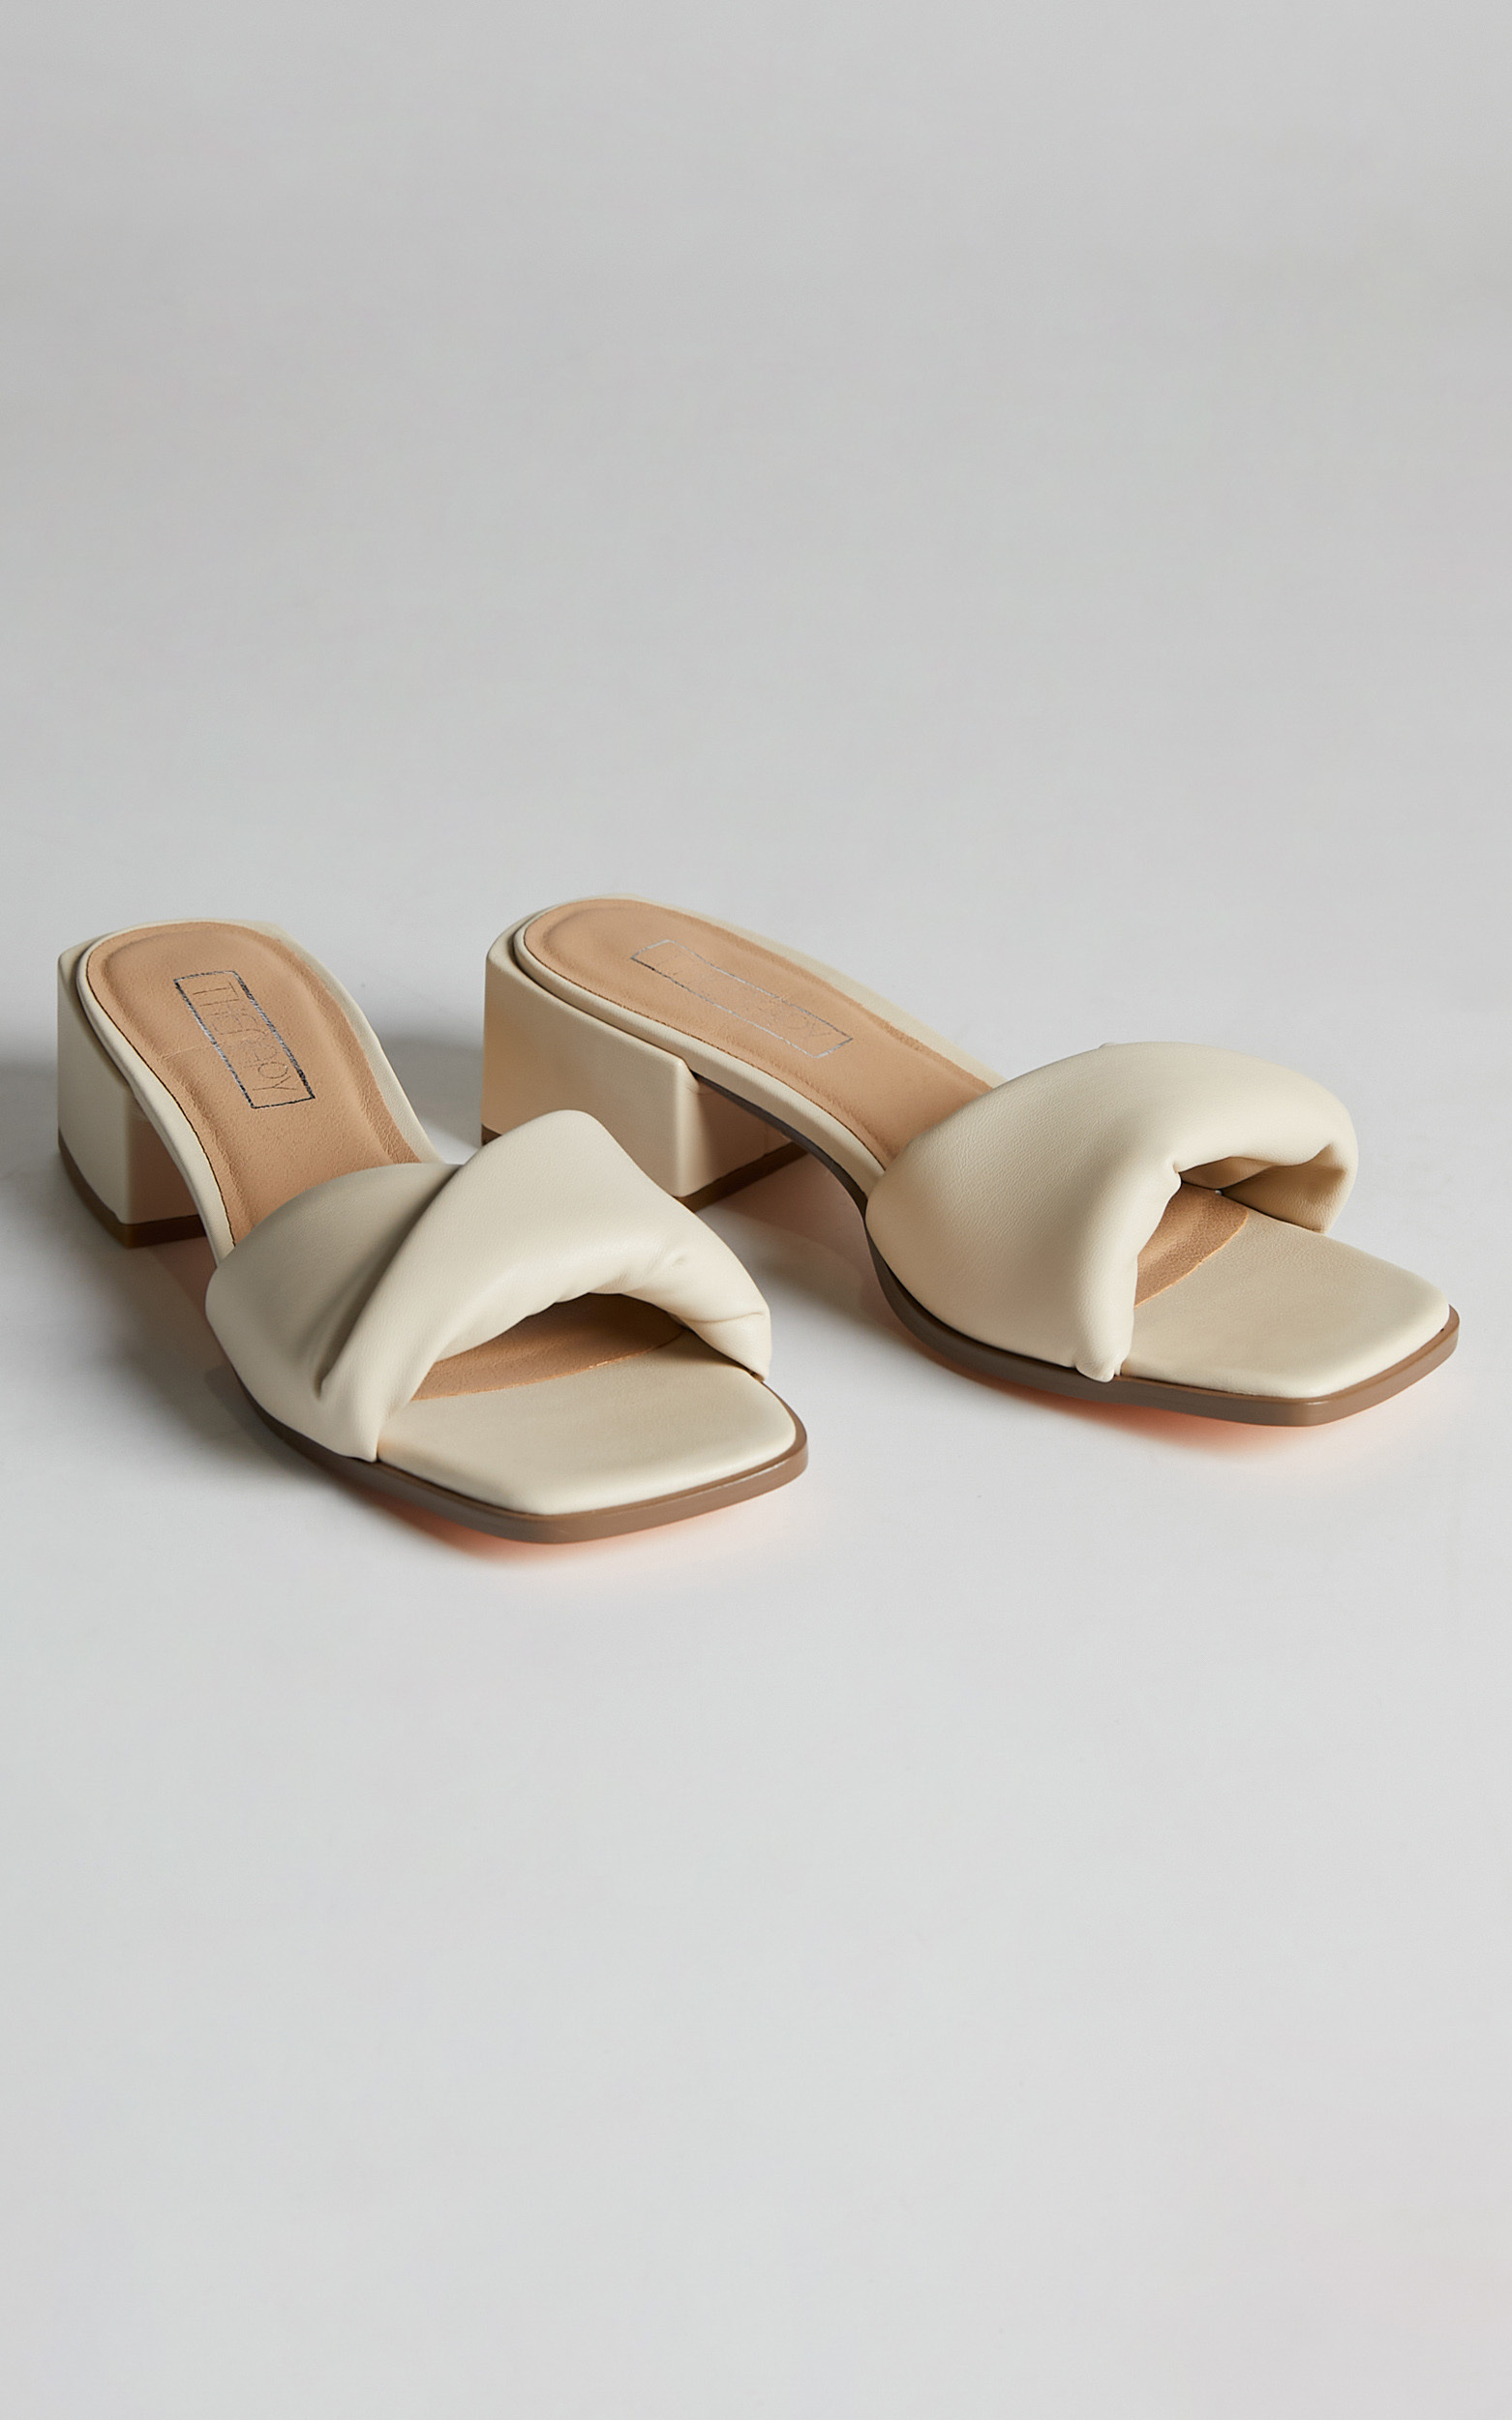 THERAPY - SKYE MULES in bone - 05, BRN2, hi-res image number null